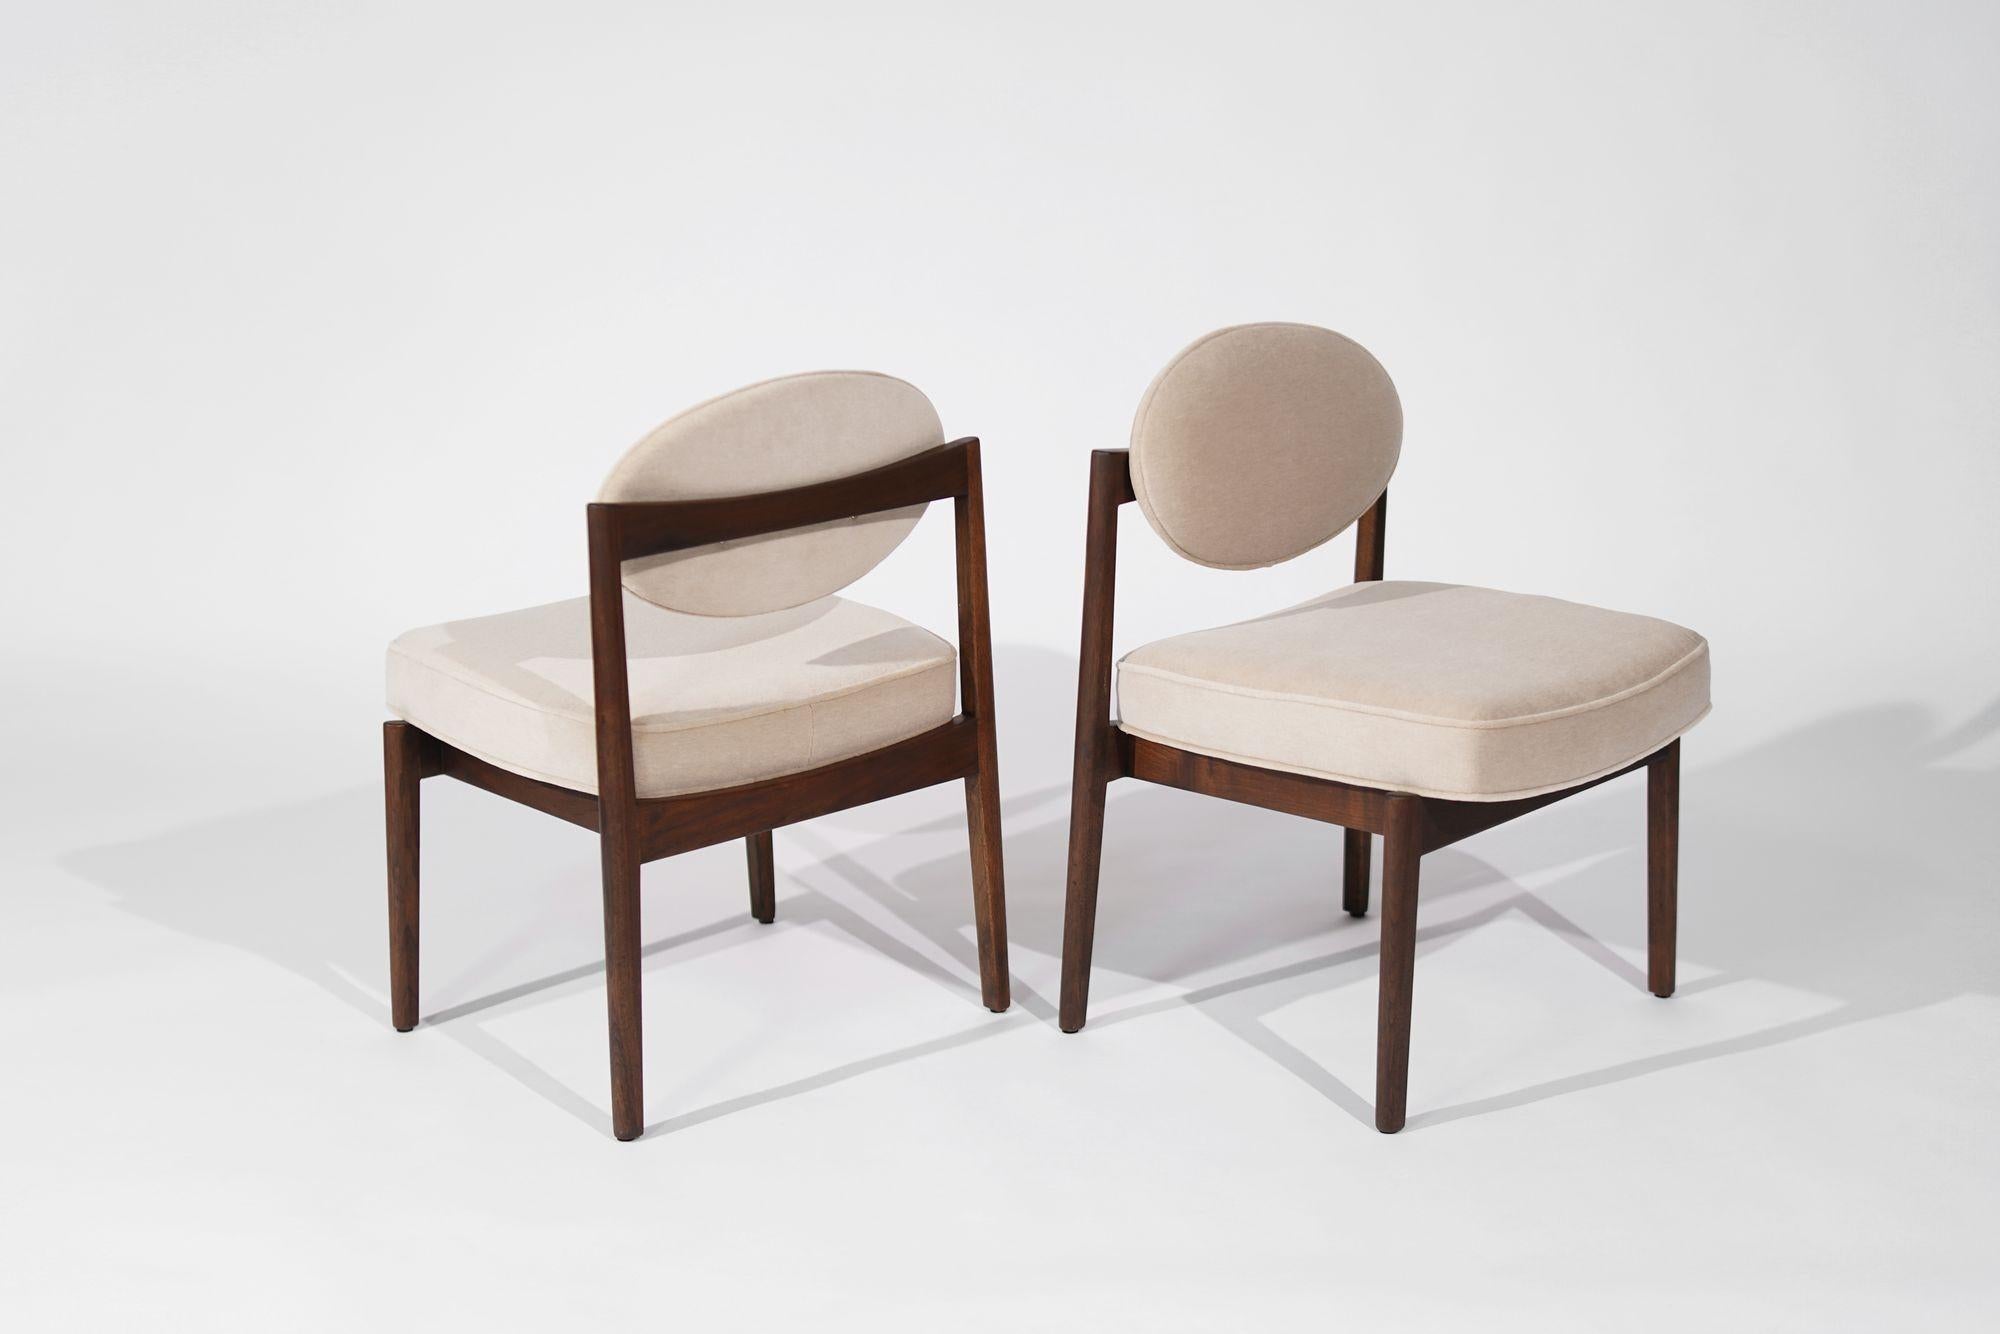 20th Century Set of Walnut Side Chairs by Jens Risom in Natural Mohair, C. 1950s For Sale